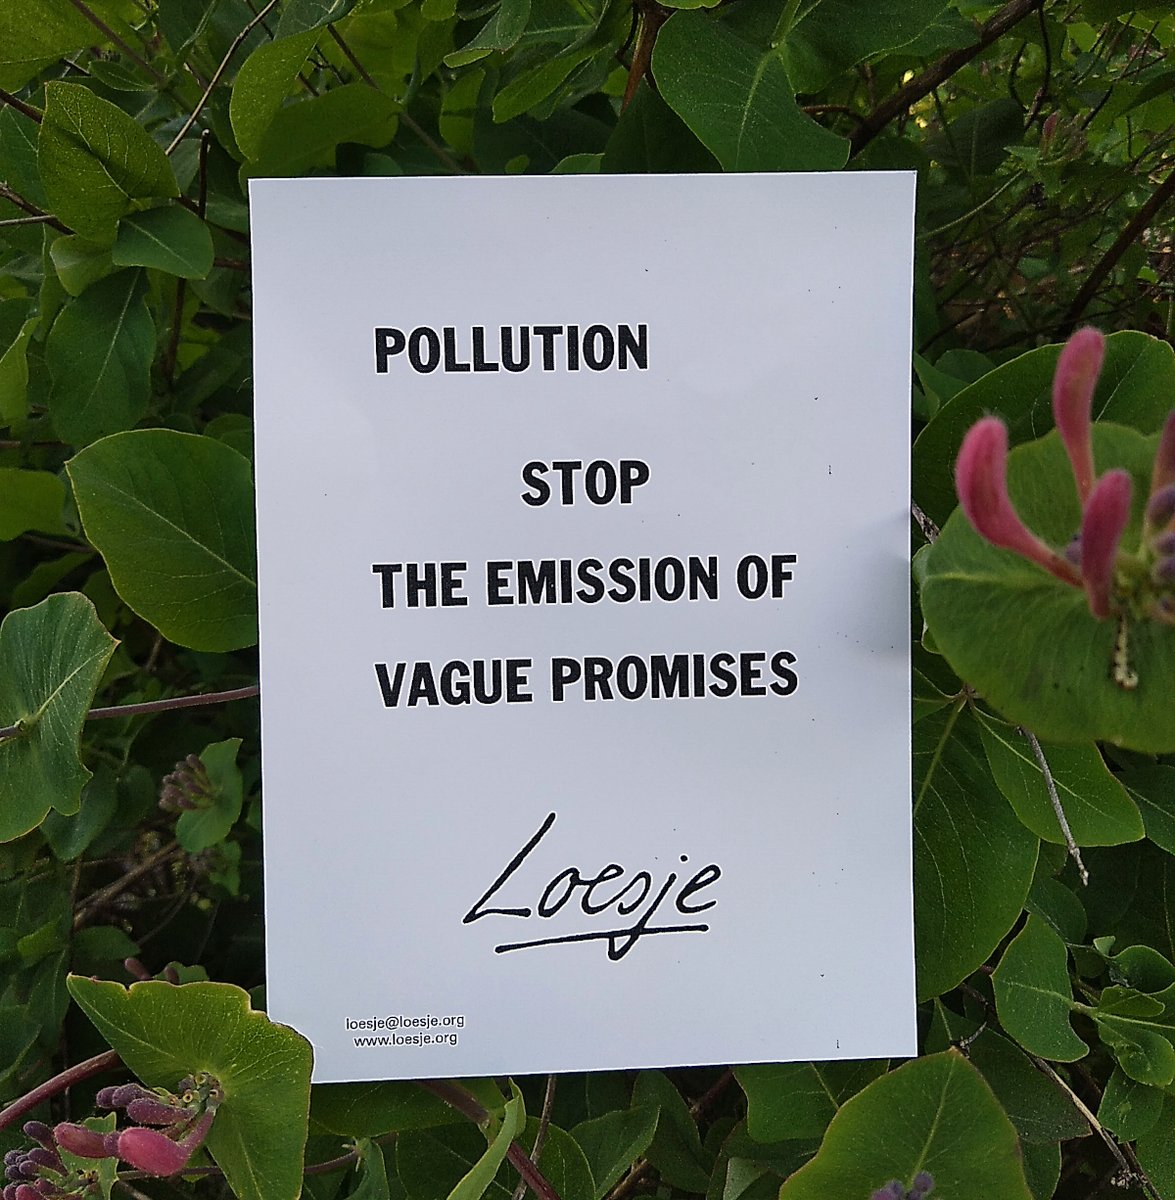 Pollution 
   stop the emission of vague promises

#Loesje
#pollution #pollutionfree #future #green #nature
#environmentaljustice #climate #promises #action